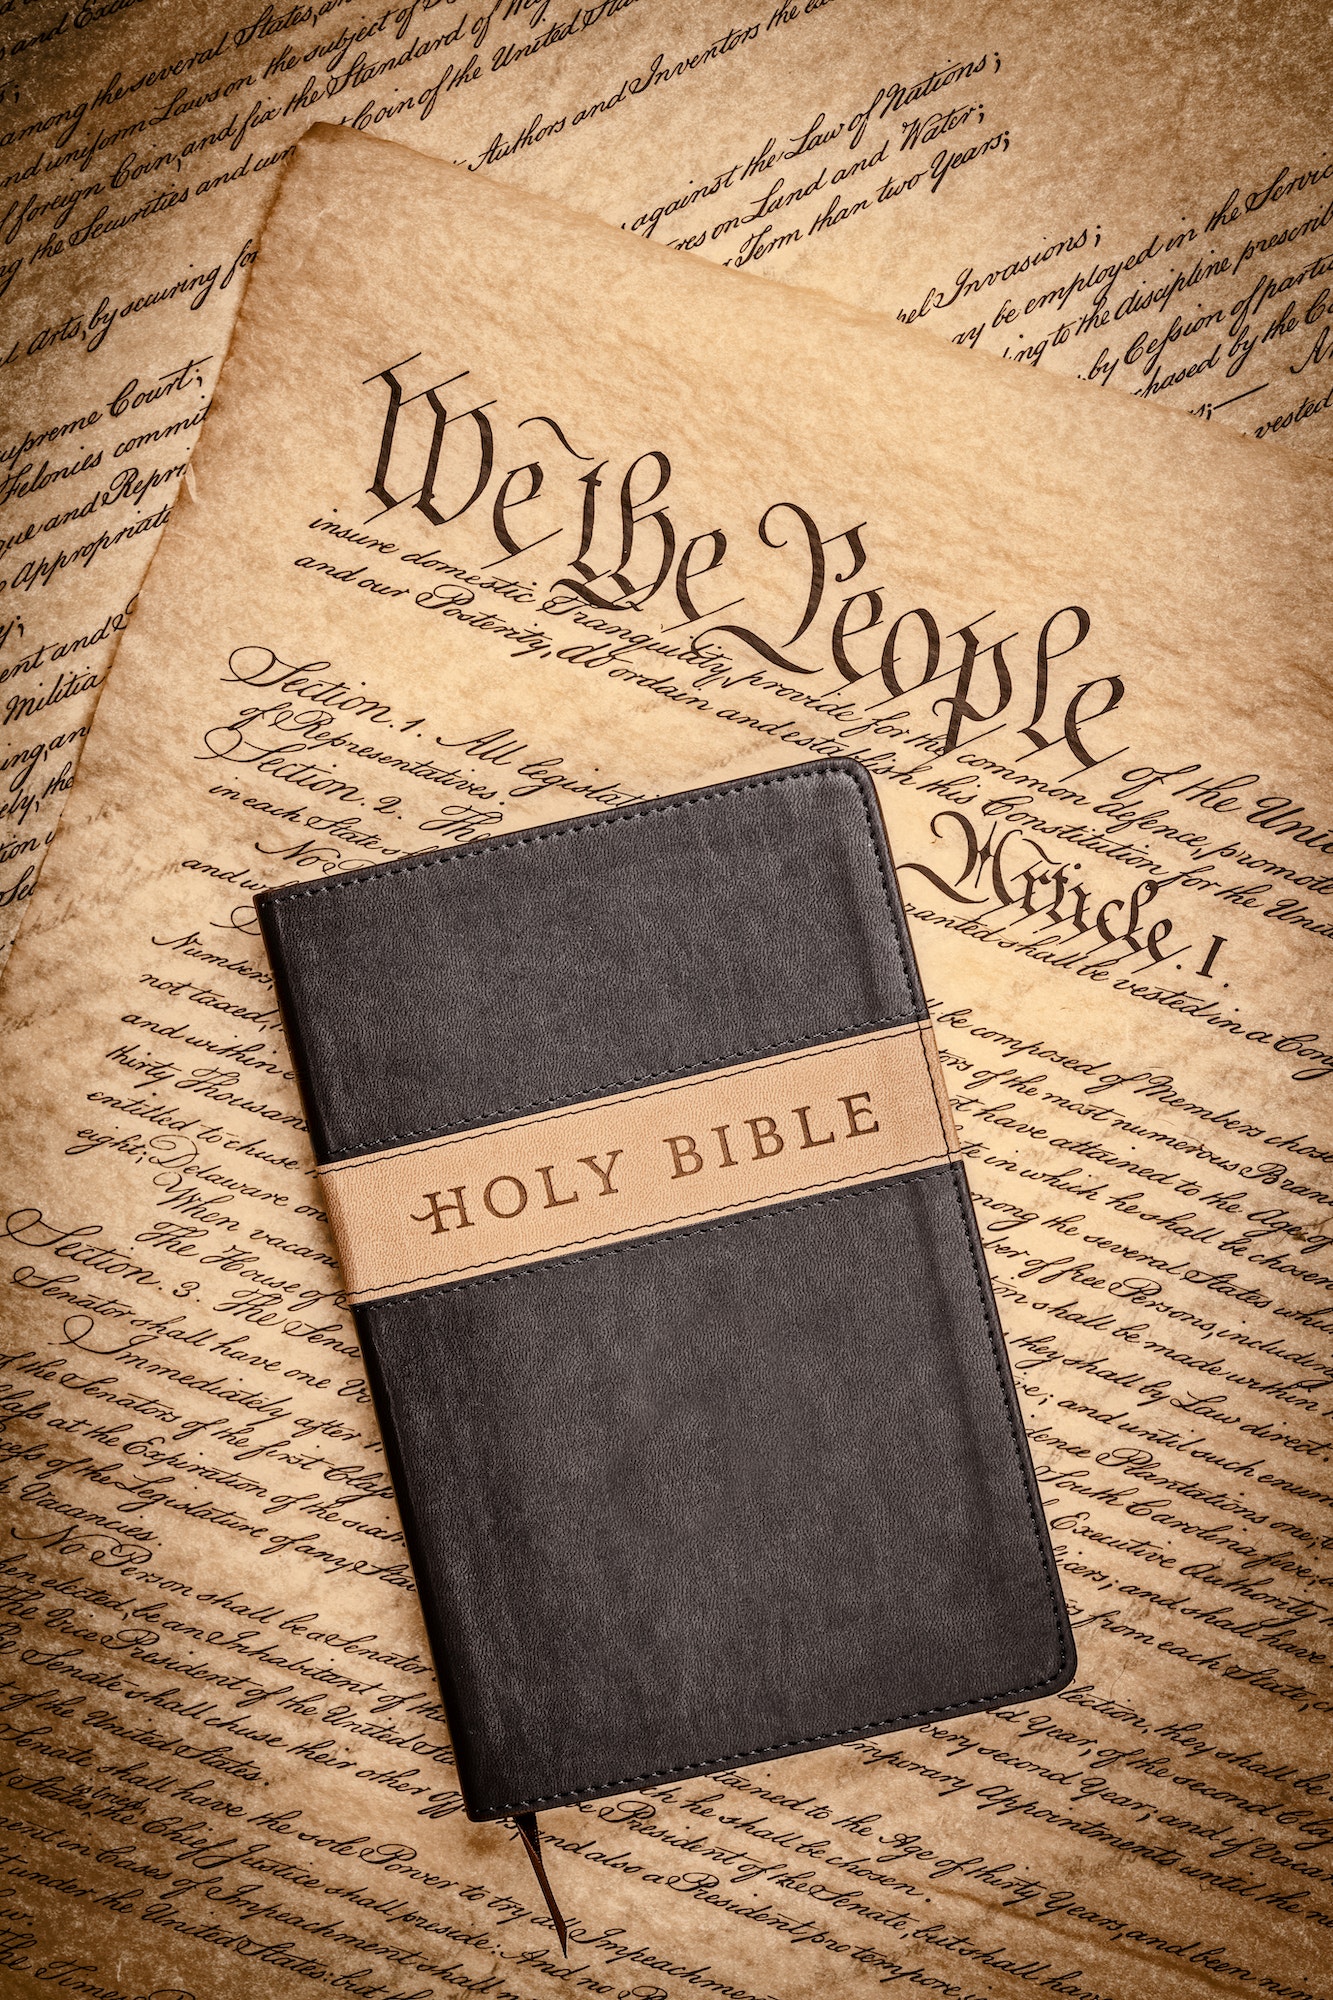 Holy bible and small cross on the constitution